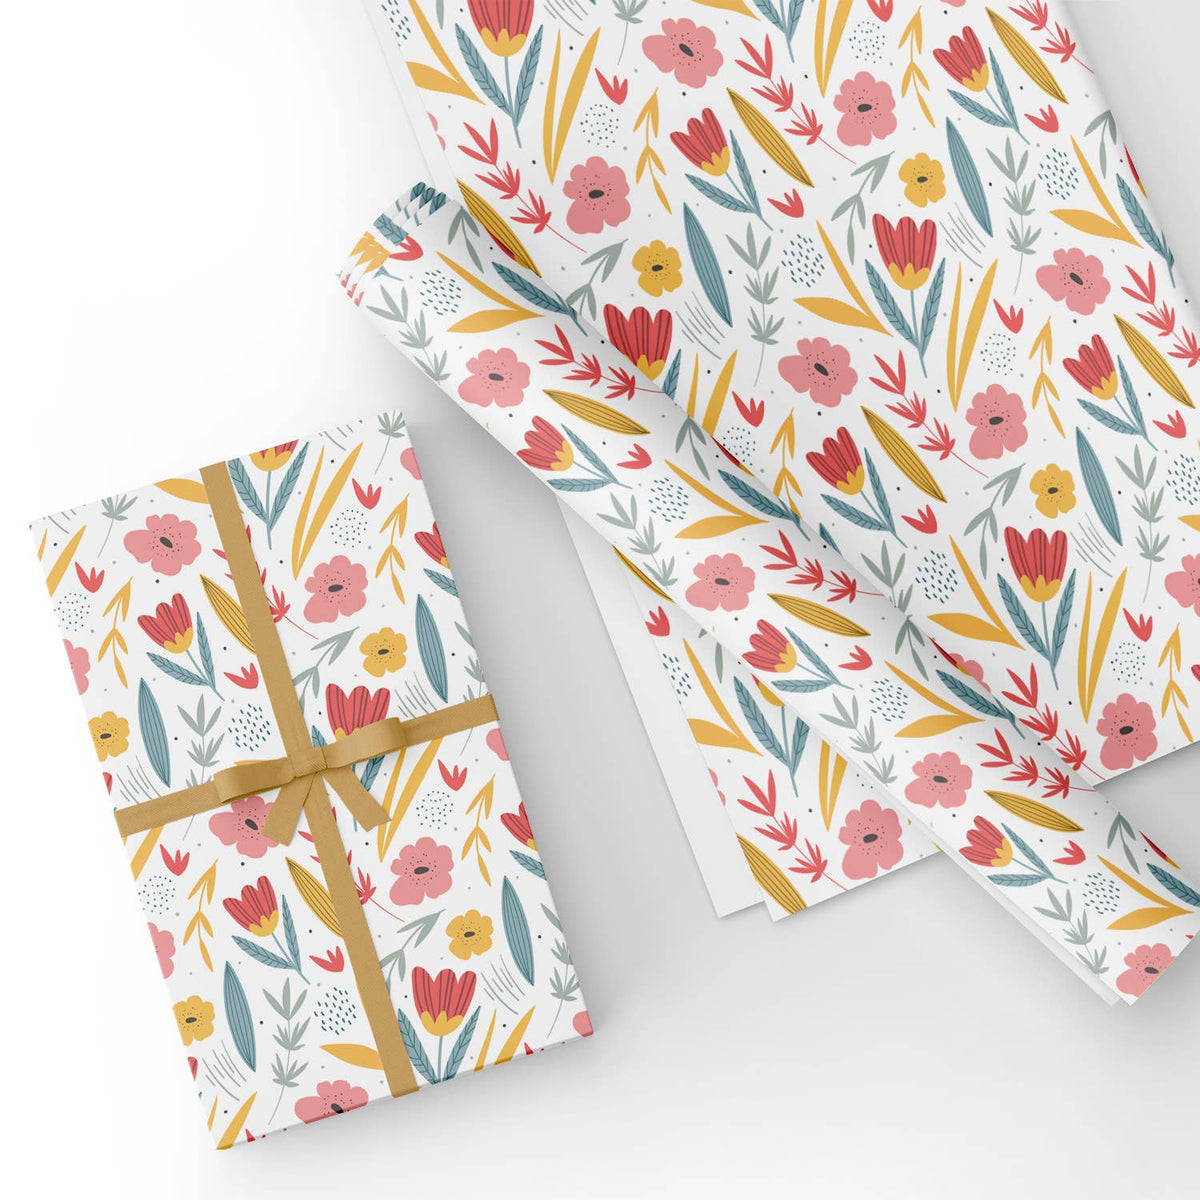 Personalized Flat Wrapping Paper for Birthday, Holiday, Christmas